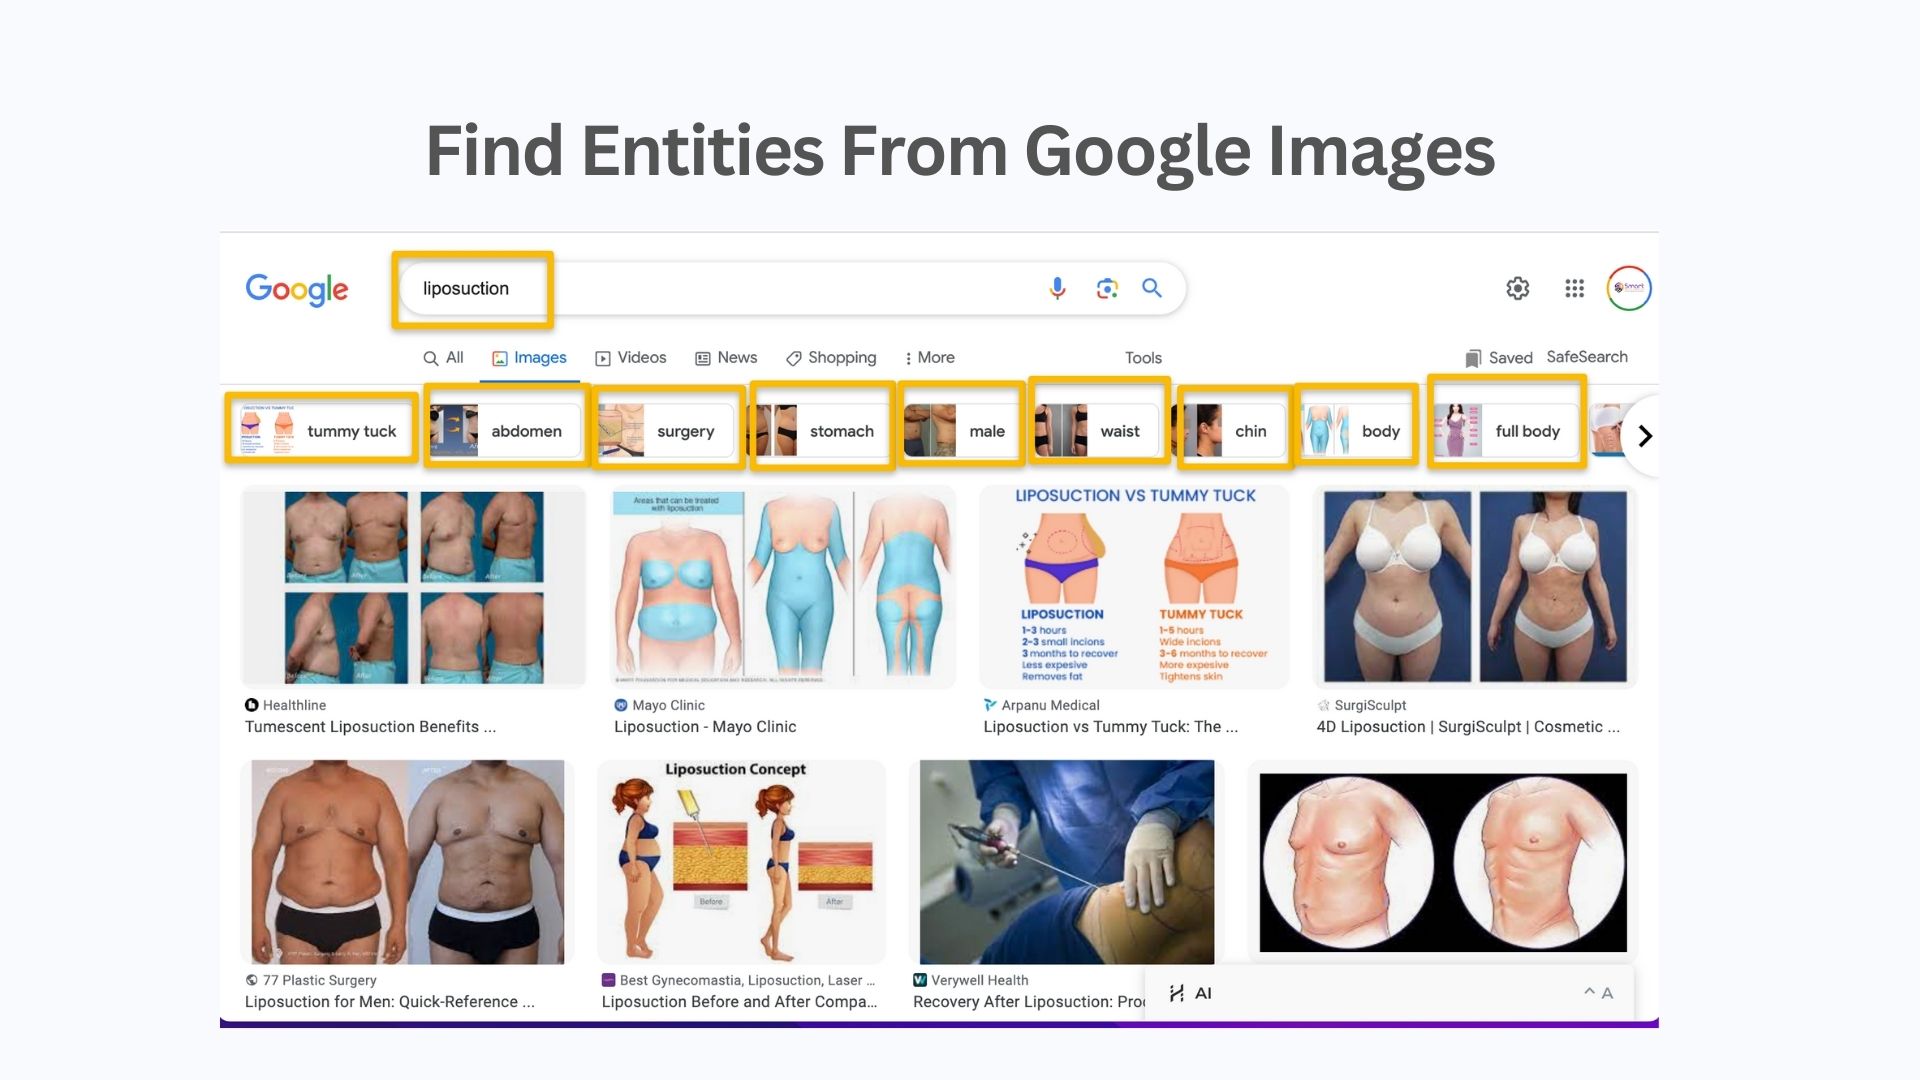 entities from Google images